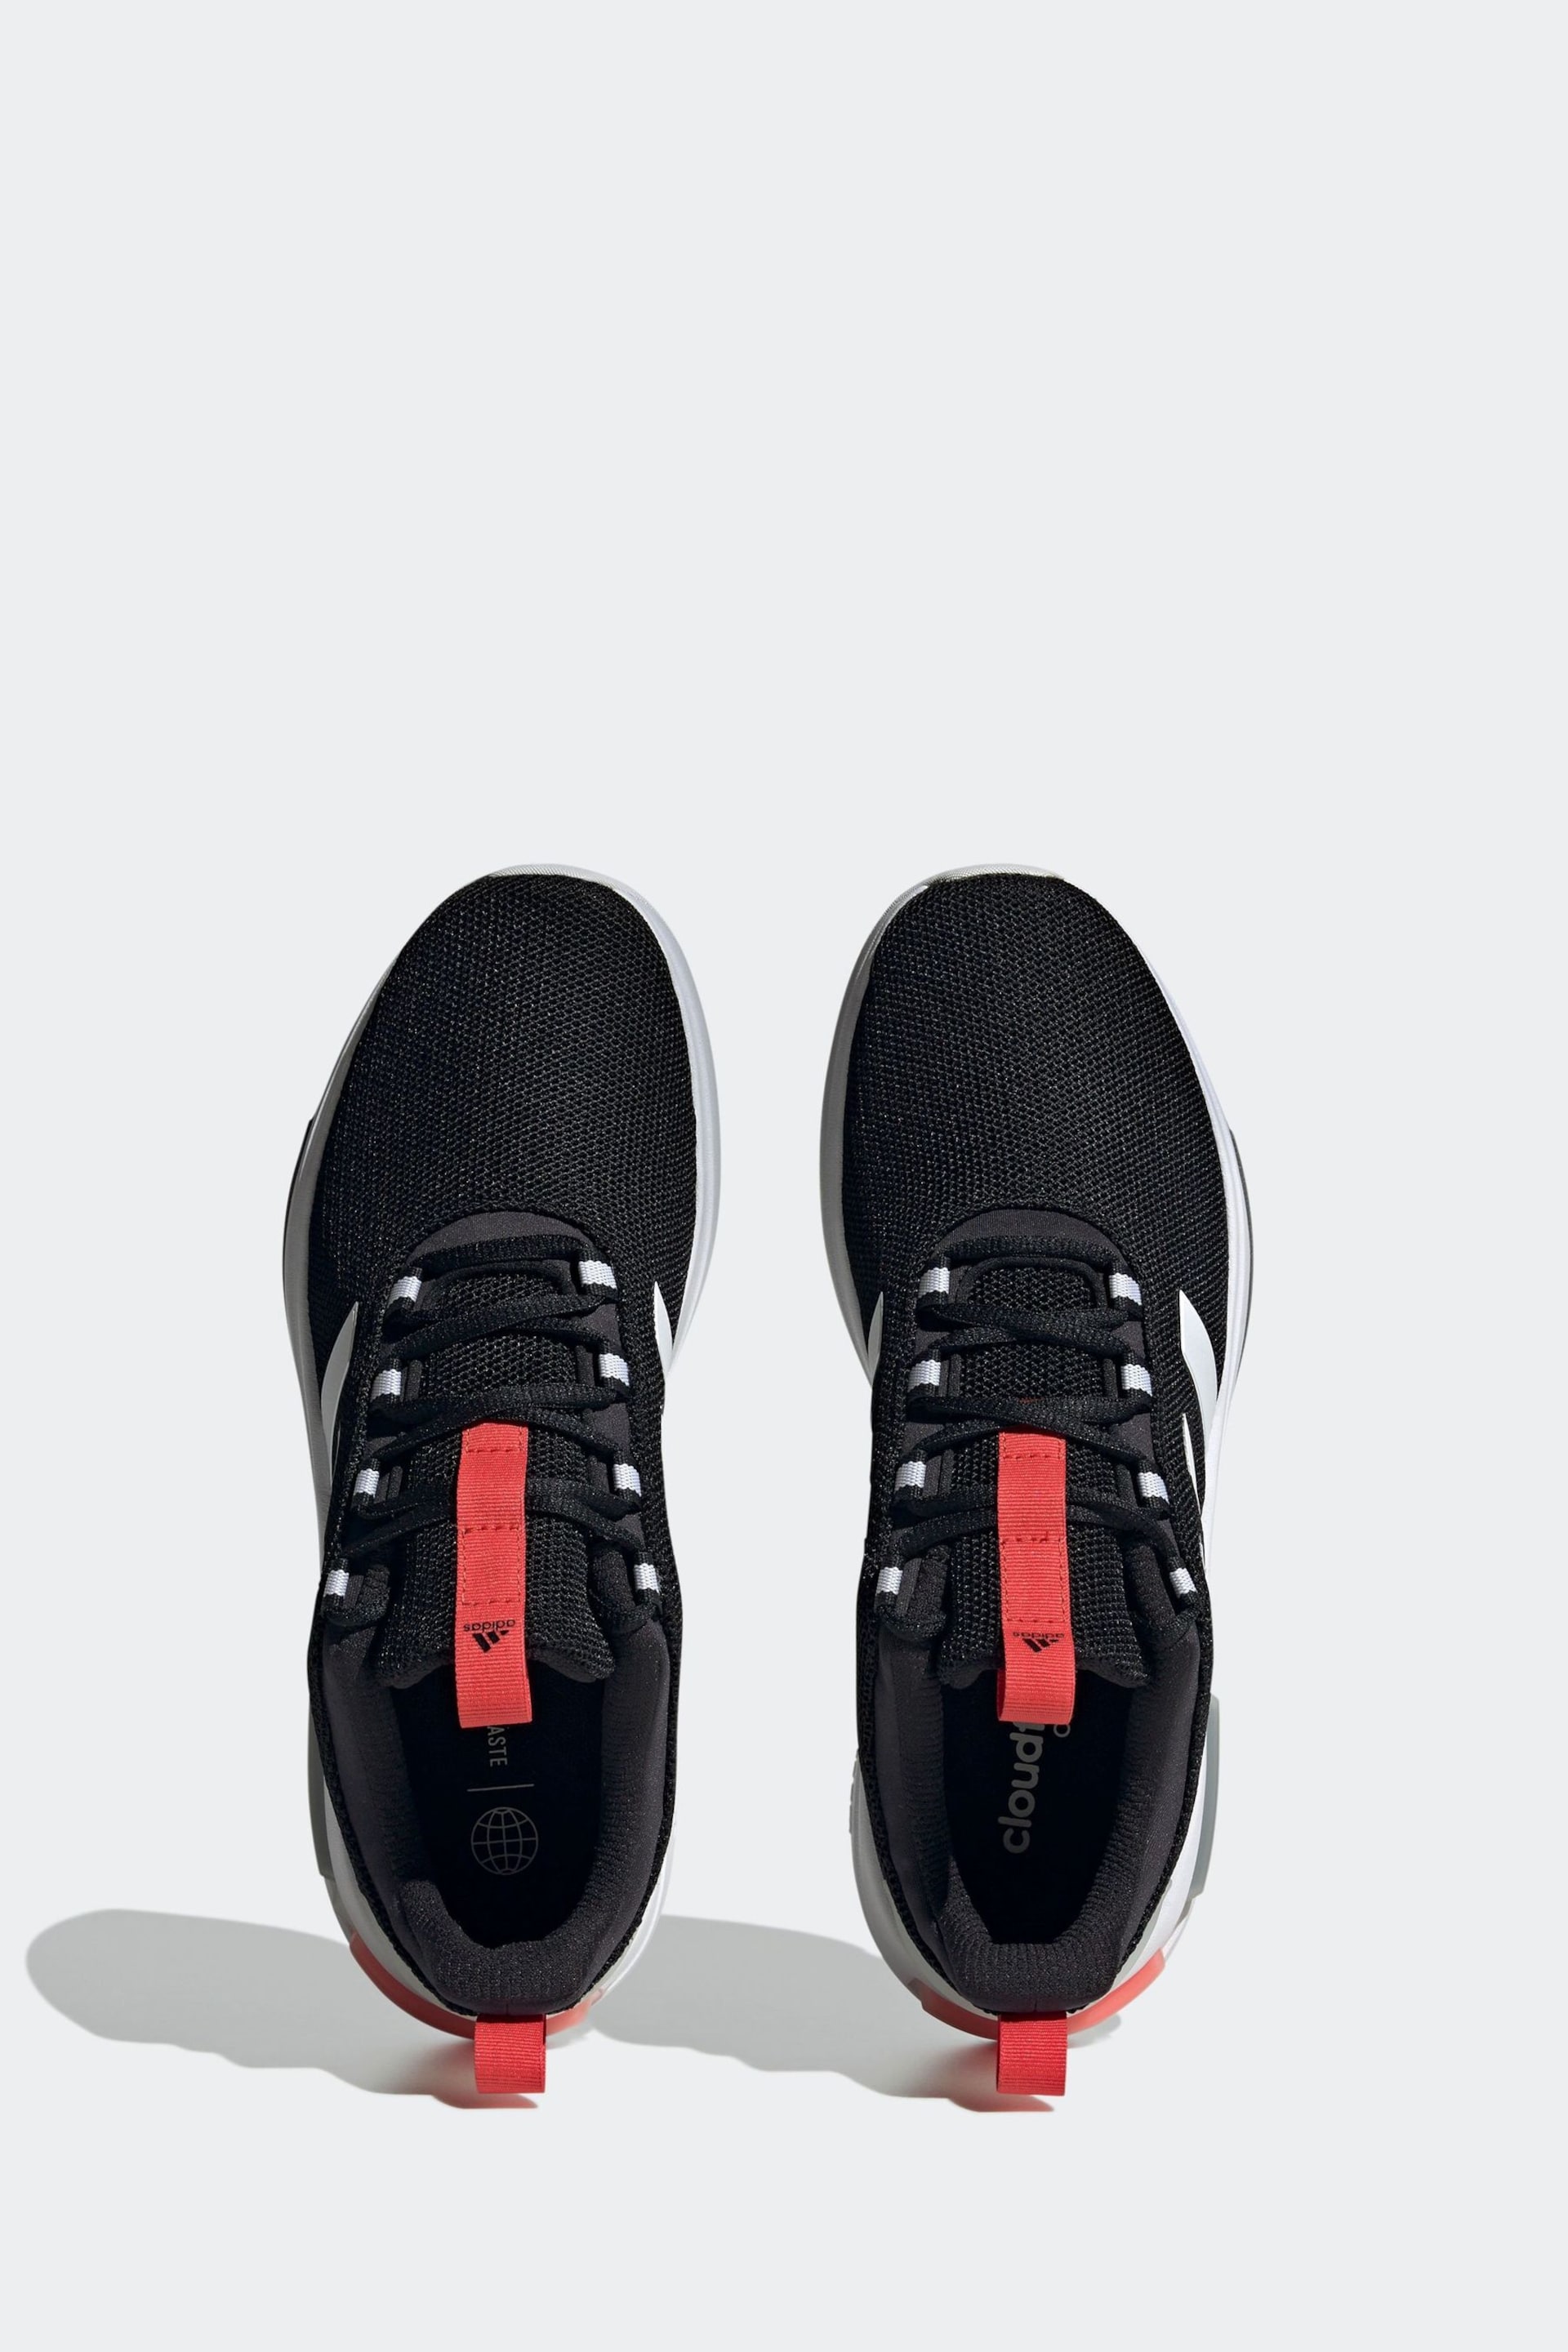 adidas Black Racer TR23 Trainers - Image 6 of 11